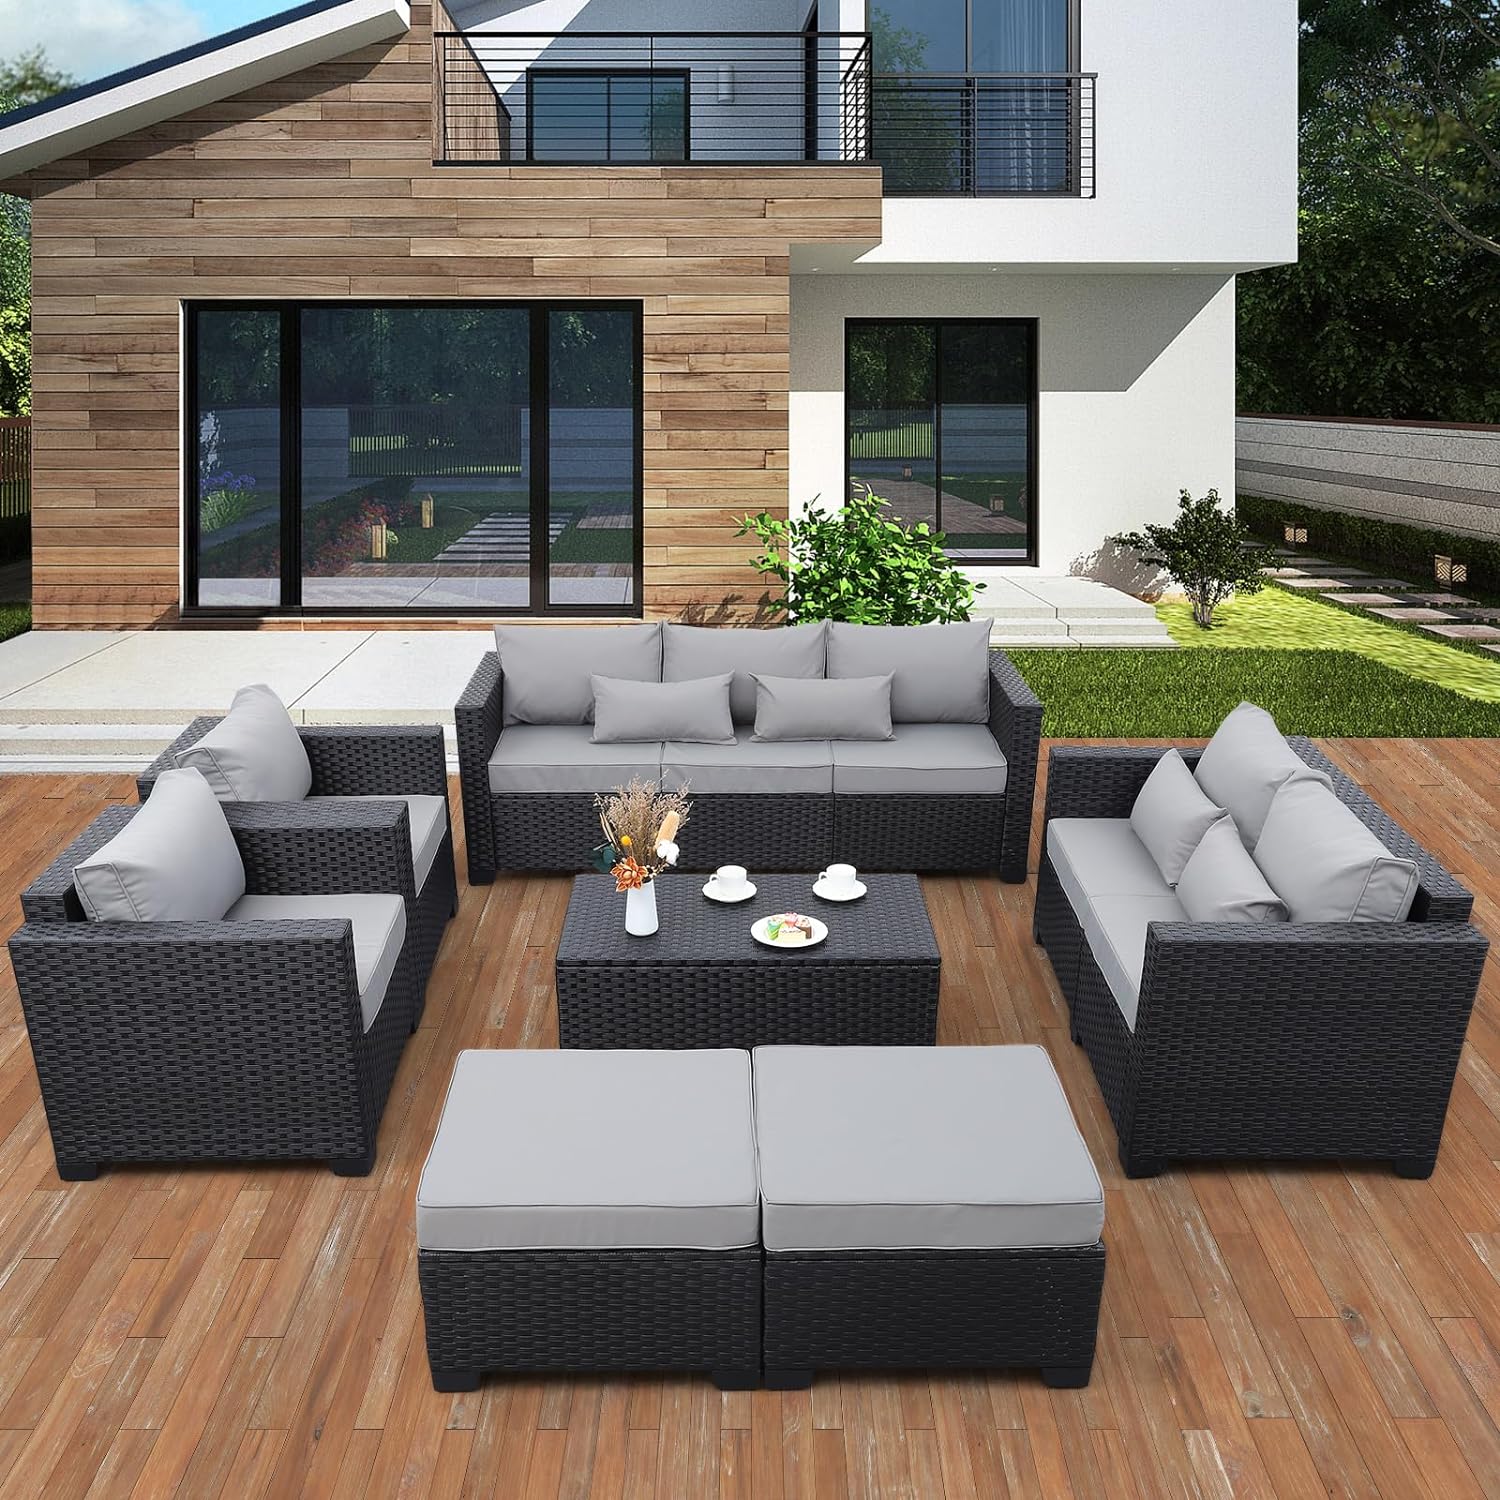 Rattaner Patio Furniture Sets 7 Pieces Outdoor Furniture Sectional Patio Couches Set Storage Table No-Slip Grey Cushions and Waterproof Covers